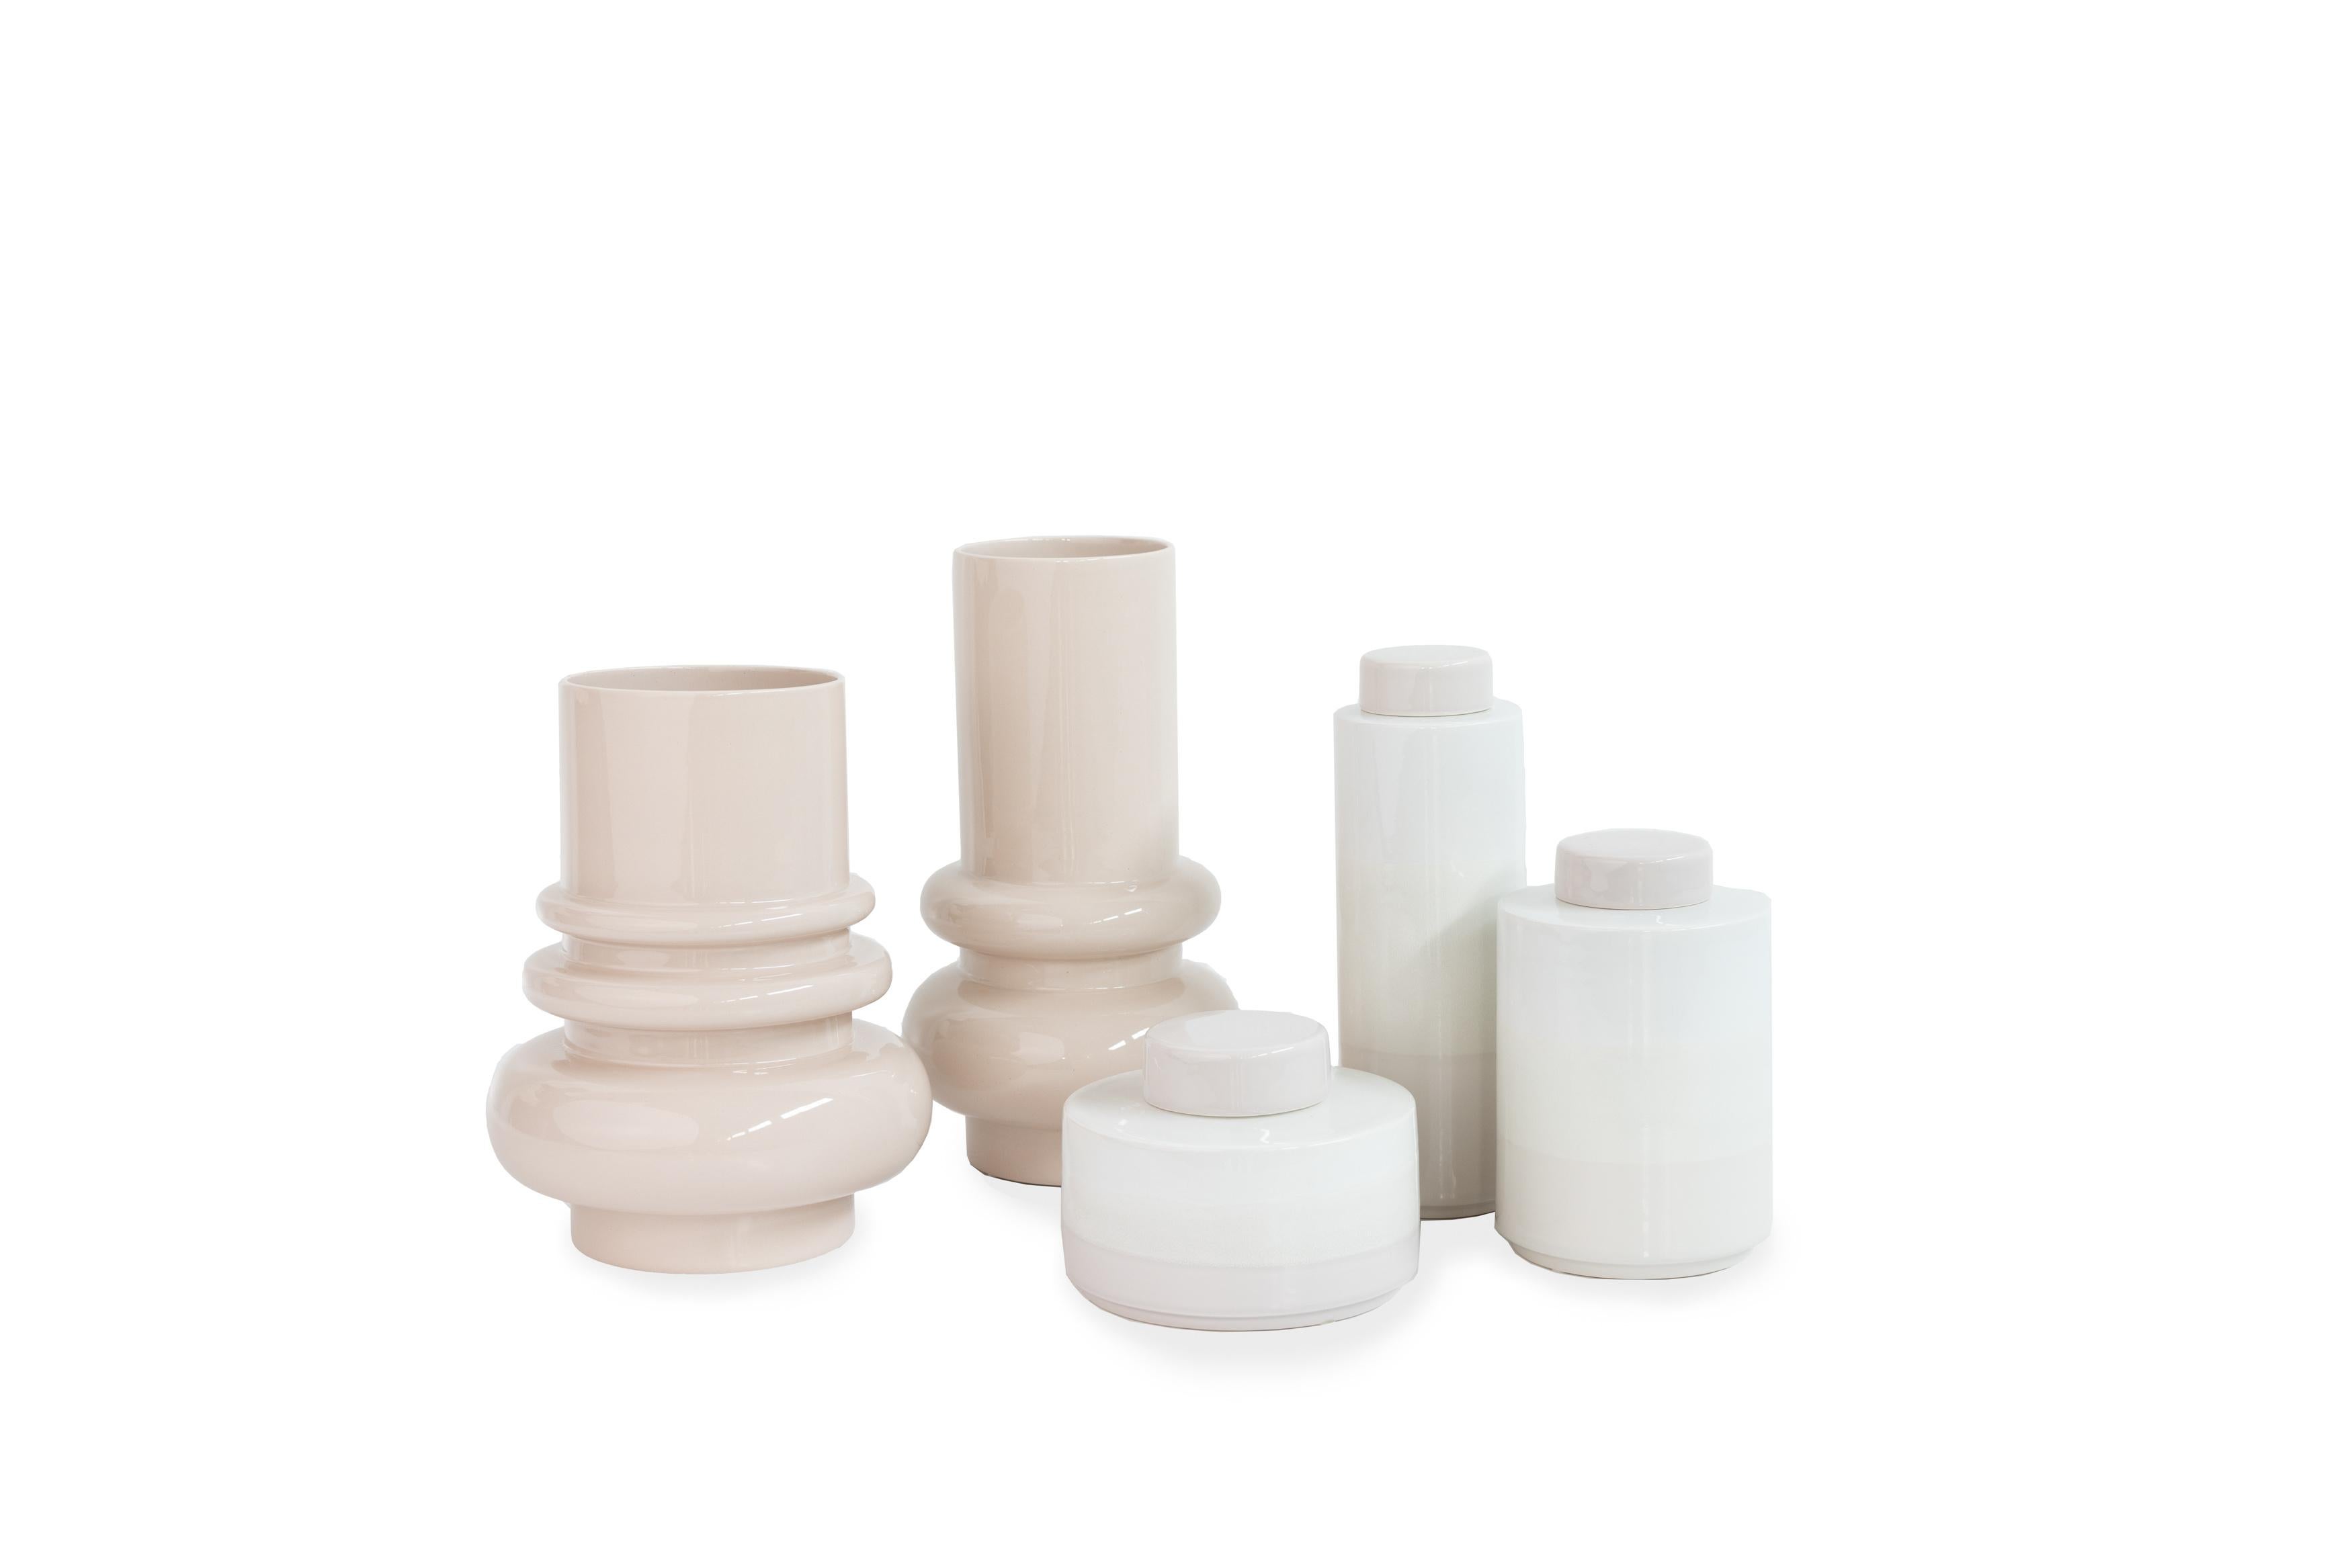 Set/8 Ceramic Jars & Pots, White & Pink, Handmade in Portugal by Lusitanus Home For Sale 3